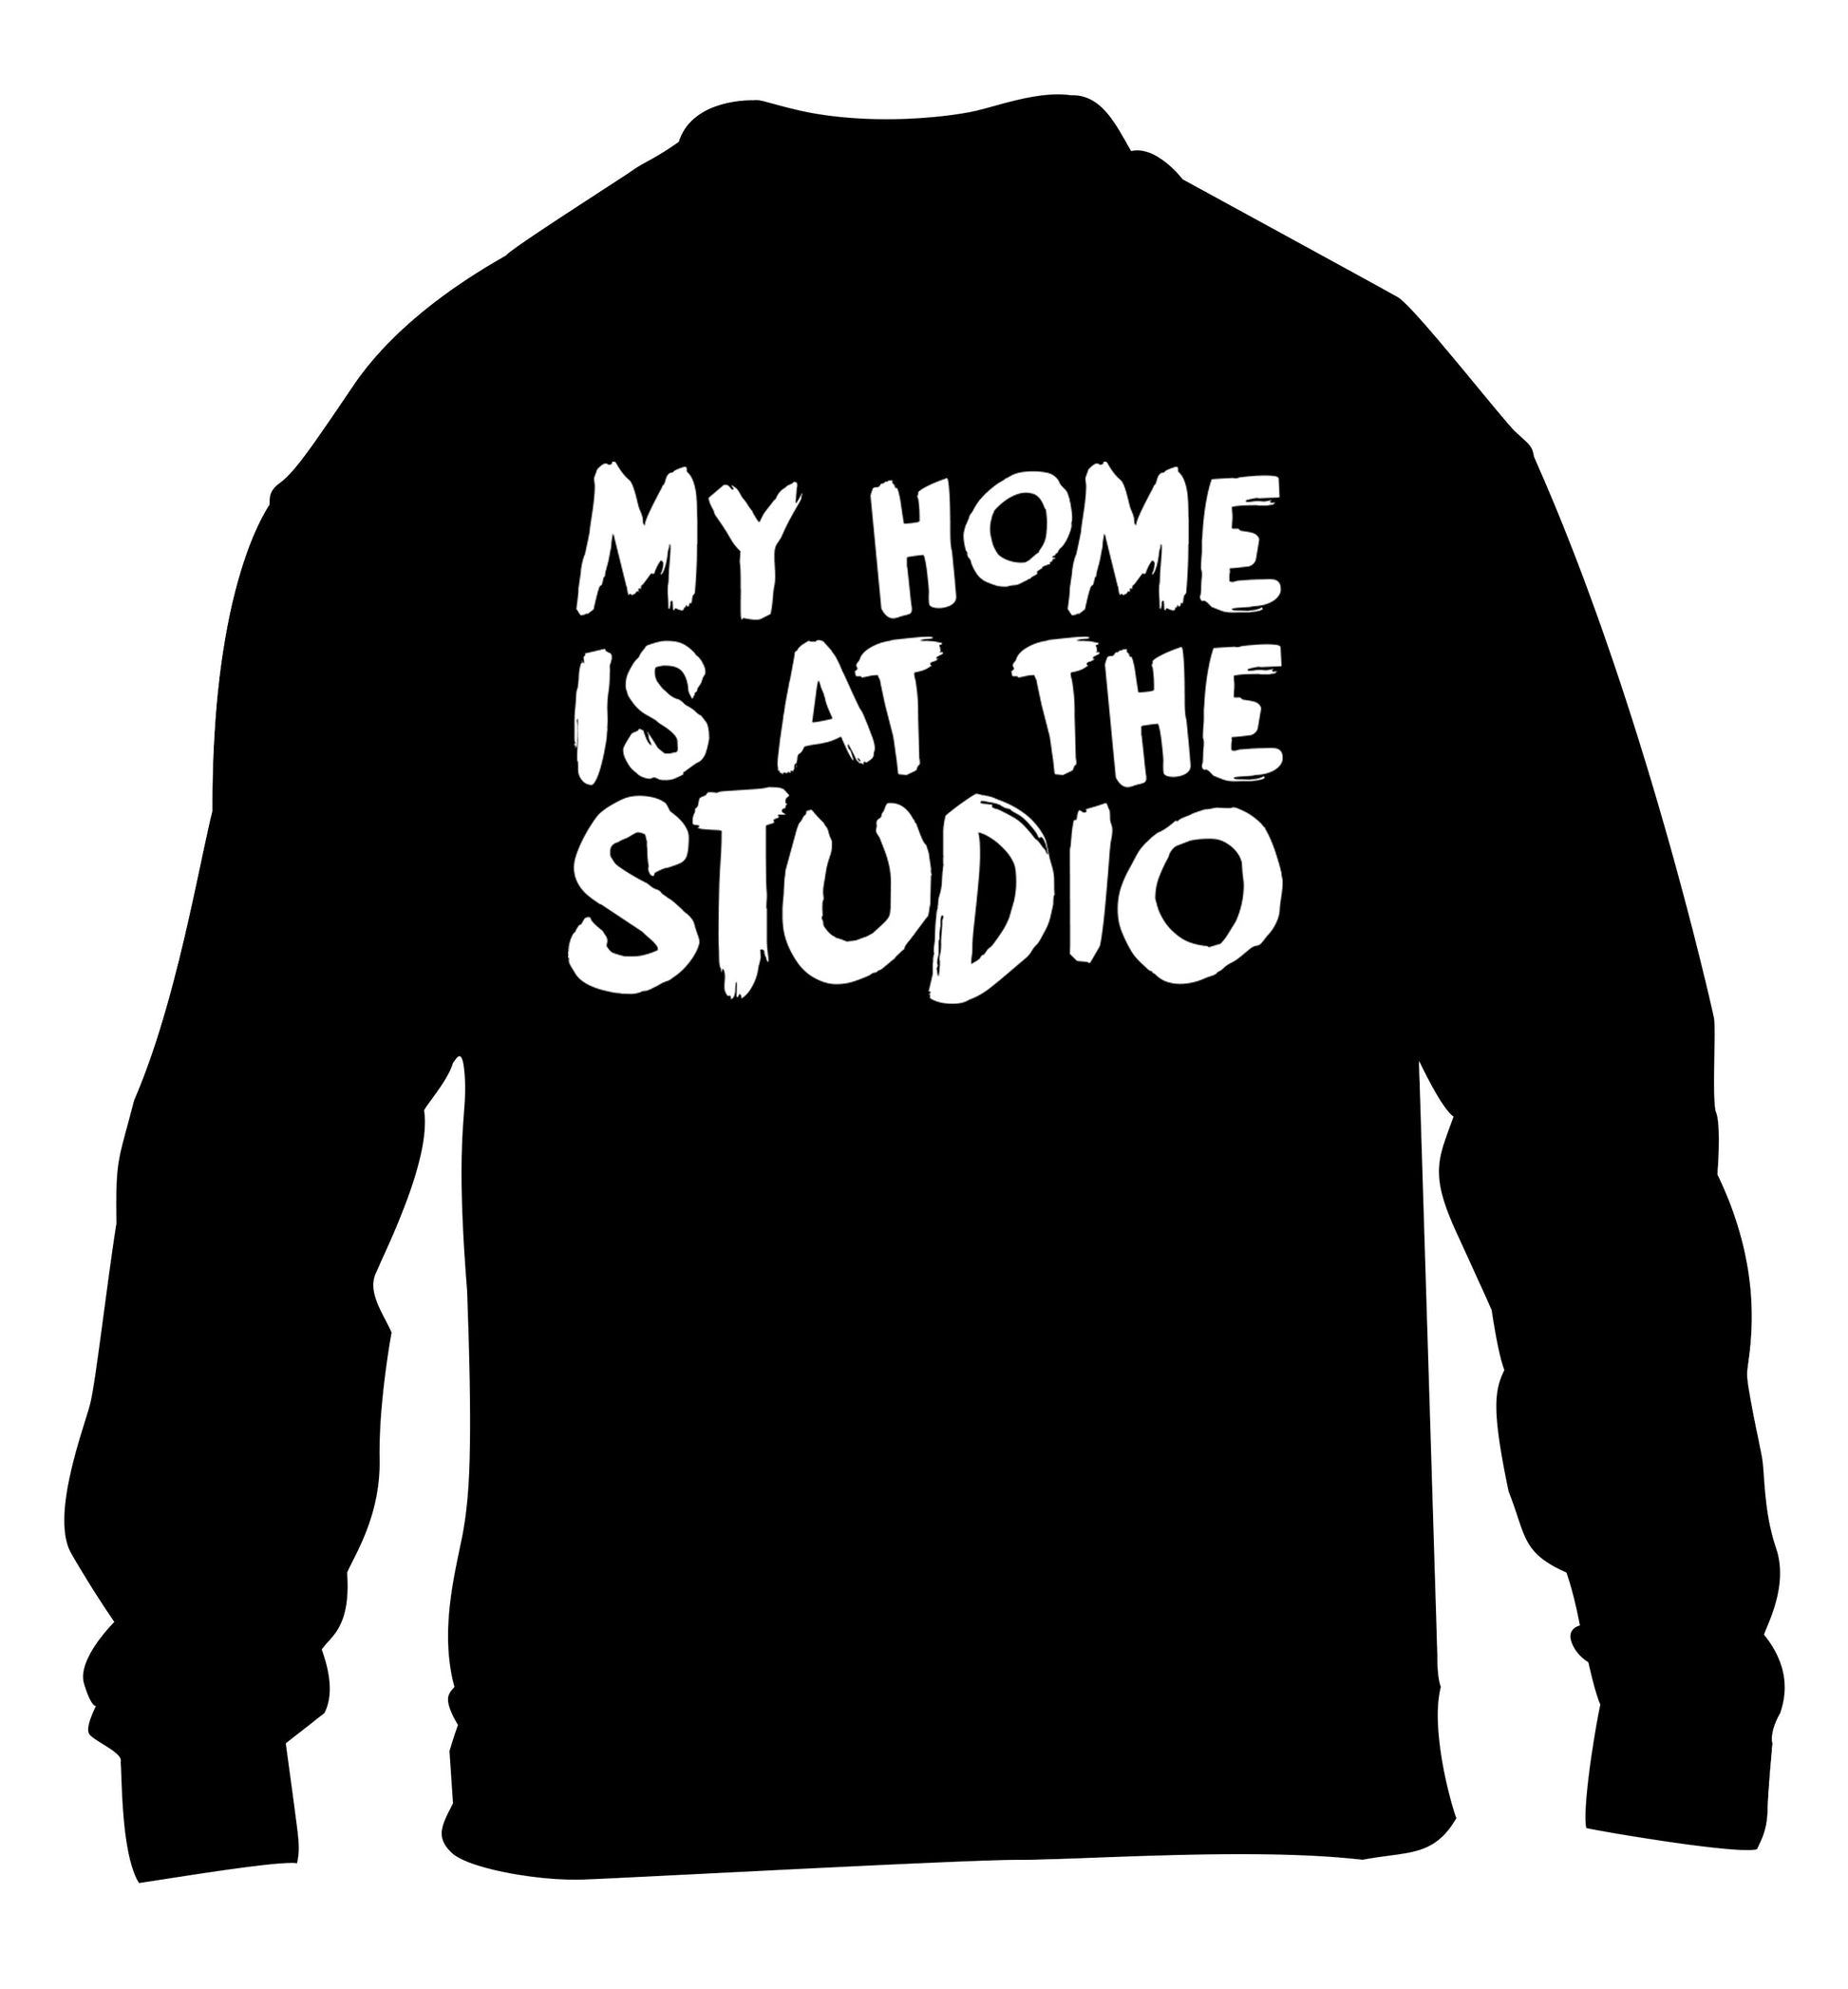 My home is at the studio children's black sweater 12-14 Years